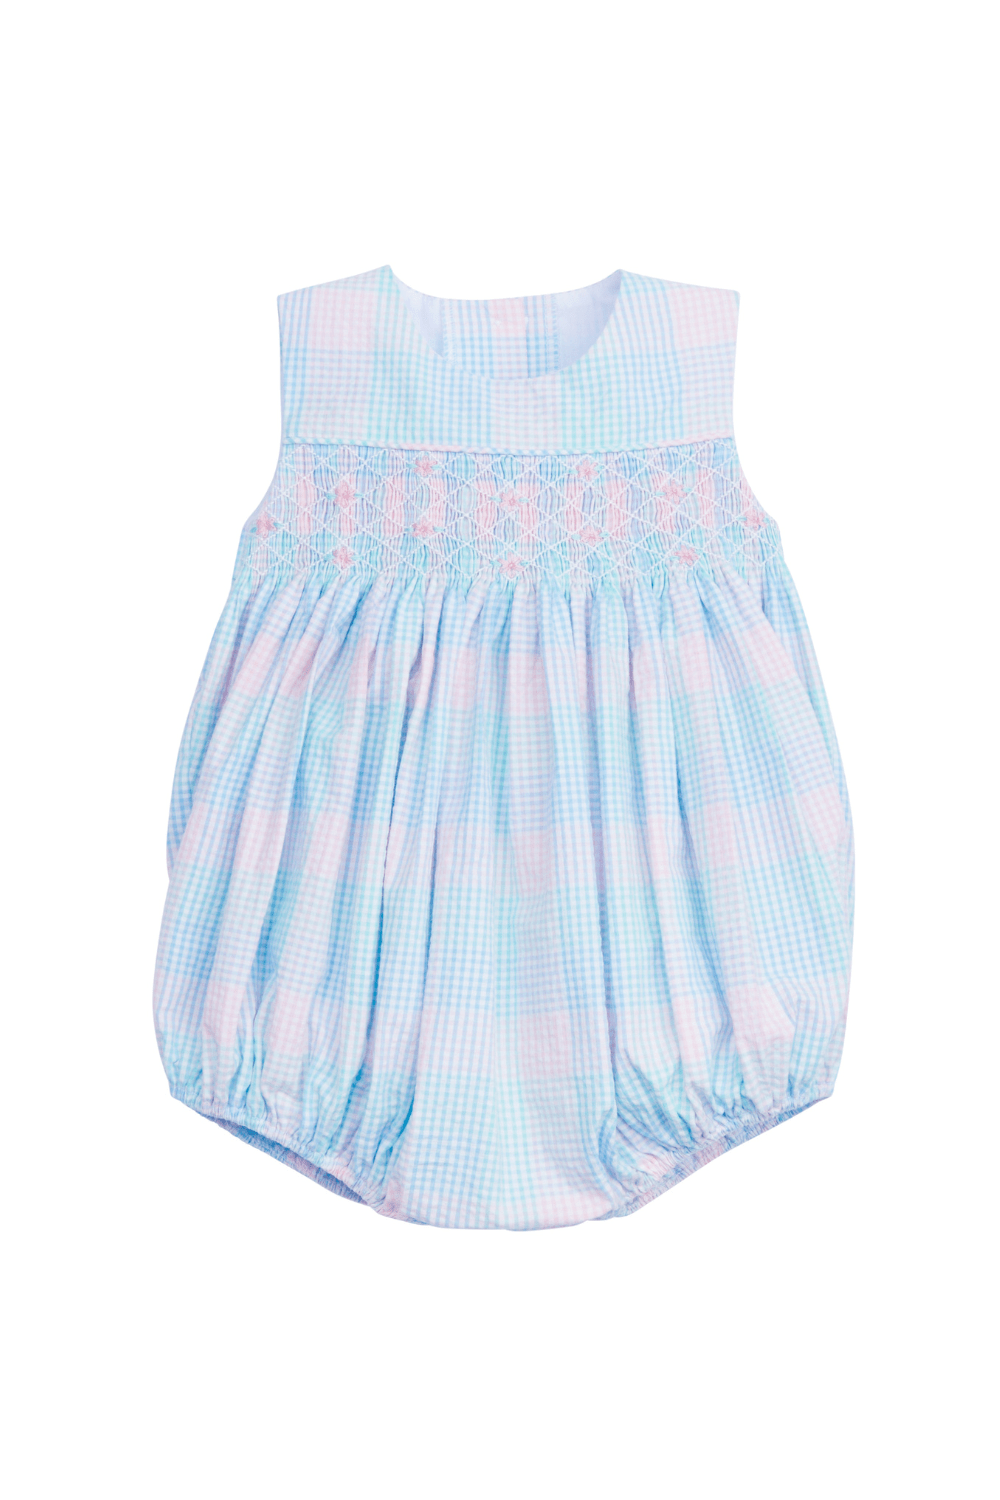 classic childrens clothing girls bubble in blue and pink plaid with blue smocking detail